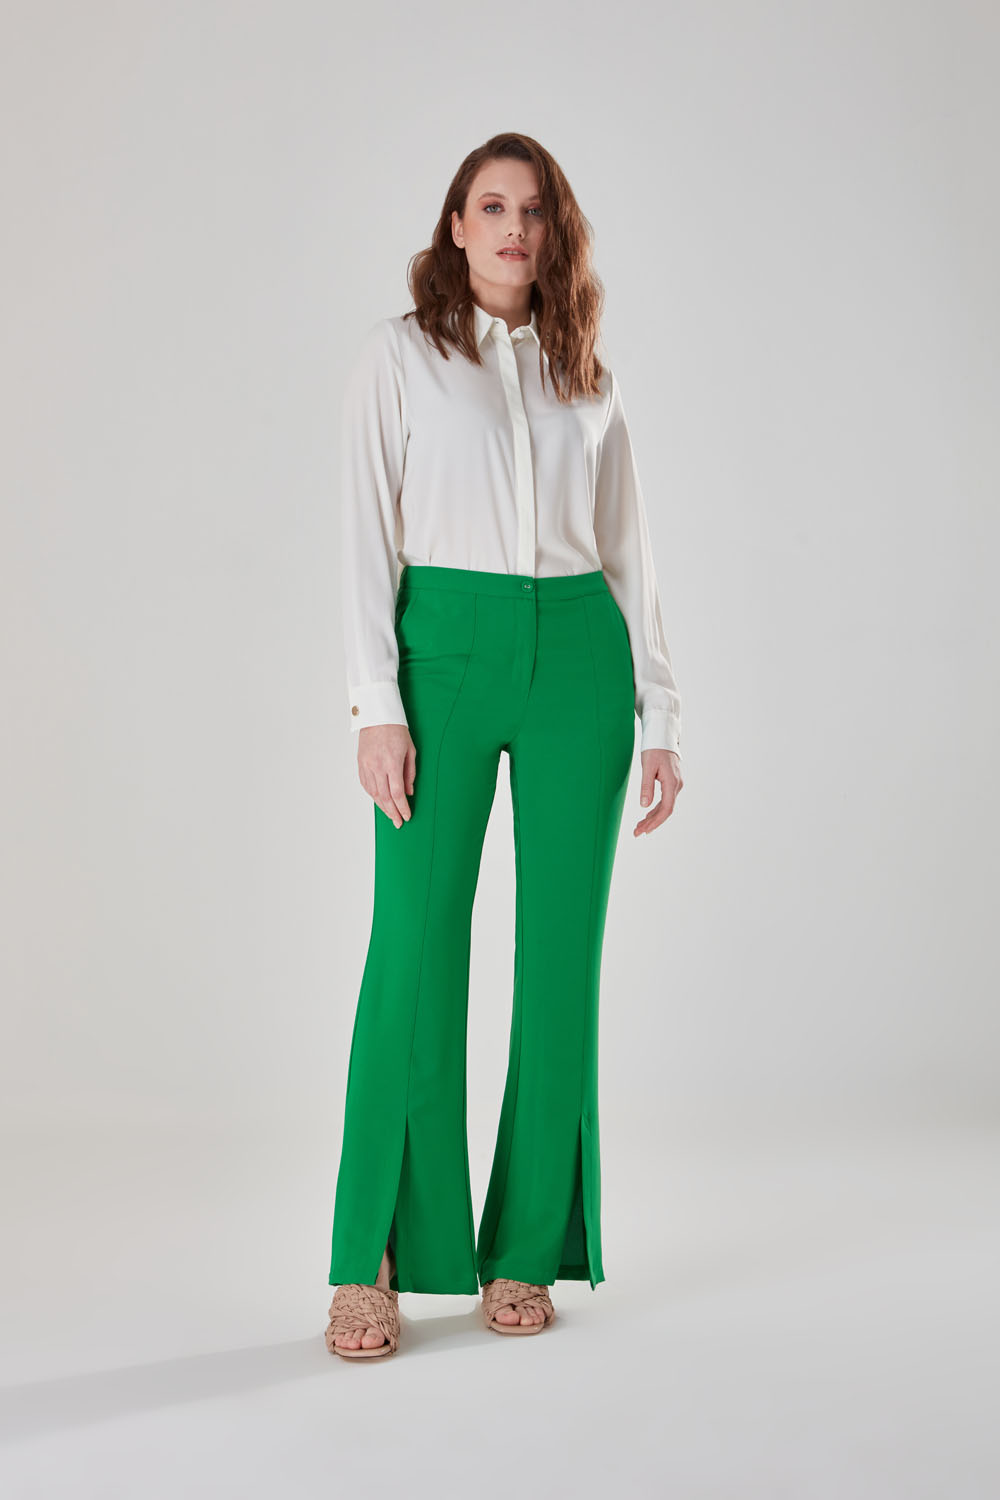 Green Woven Trousers With Sewing Slitt